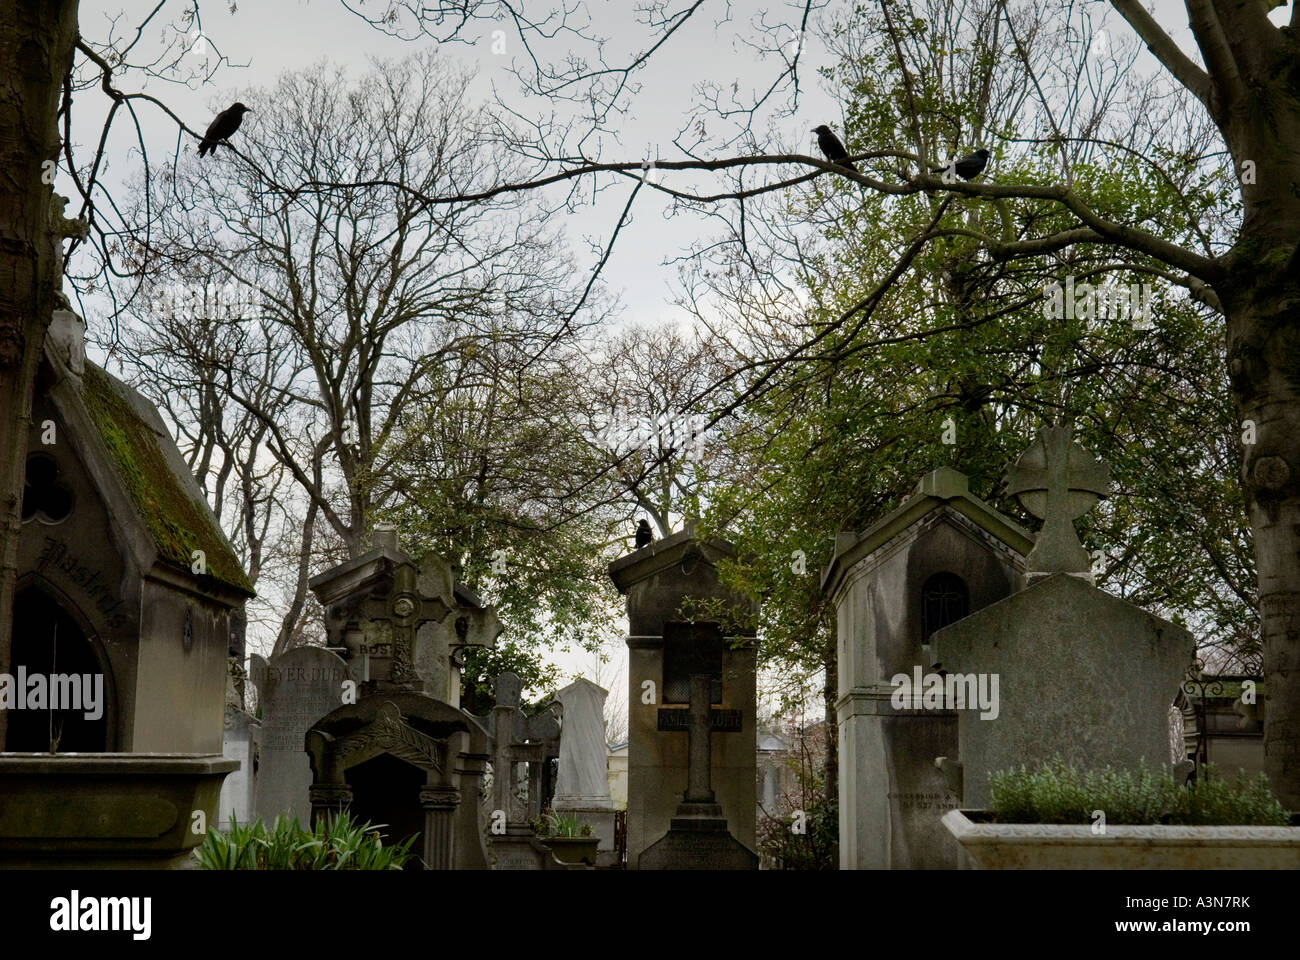 PARIS FRANCE PERE LACHAISE CEMETERY CIMETIERE DU PERE LACHAISE THE MOST FASHIONABLE PLACE TO BE LAID TO REST IN PARIS Stock Photo